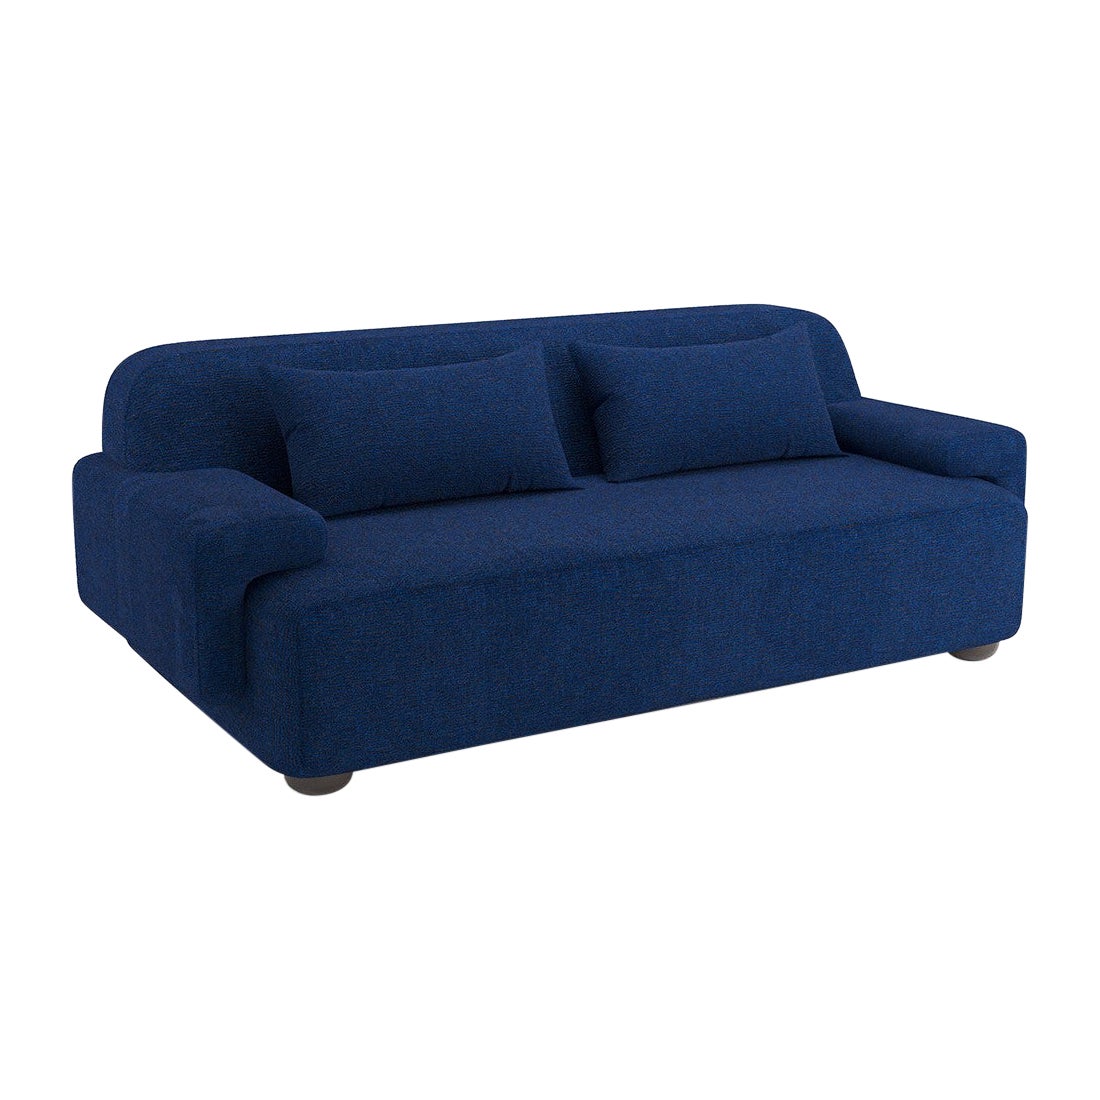 Popus Editions Lena 3 Seater Sofa in Ocean Megeve Fabric with Knit Effect For Sale